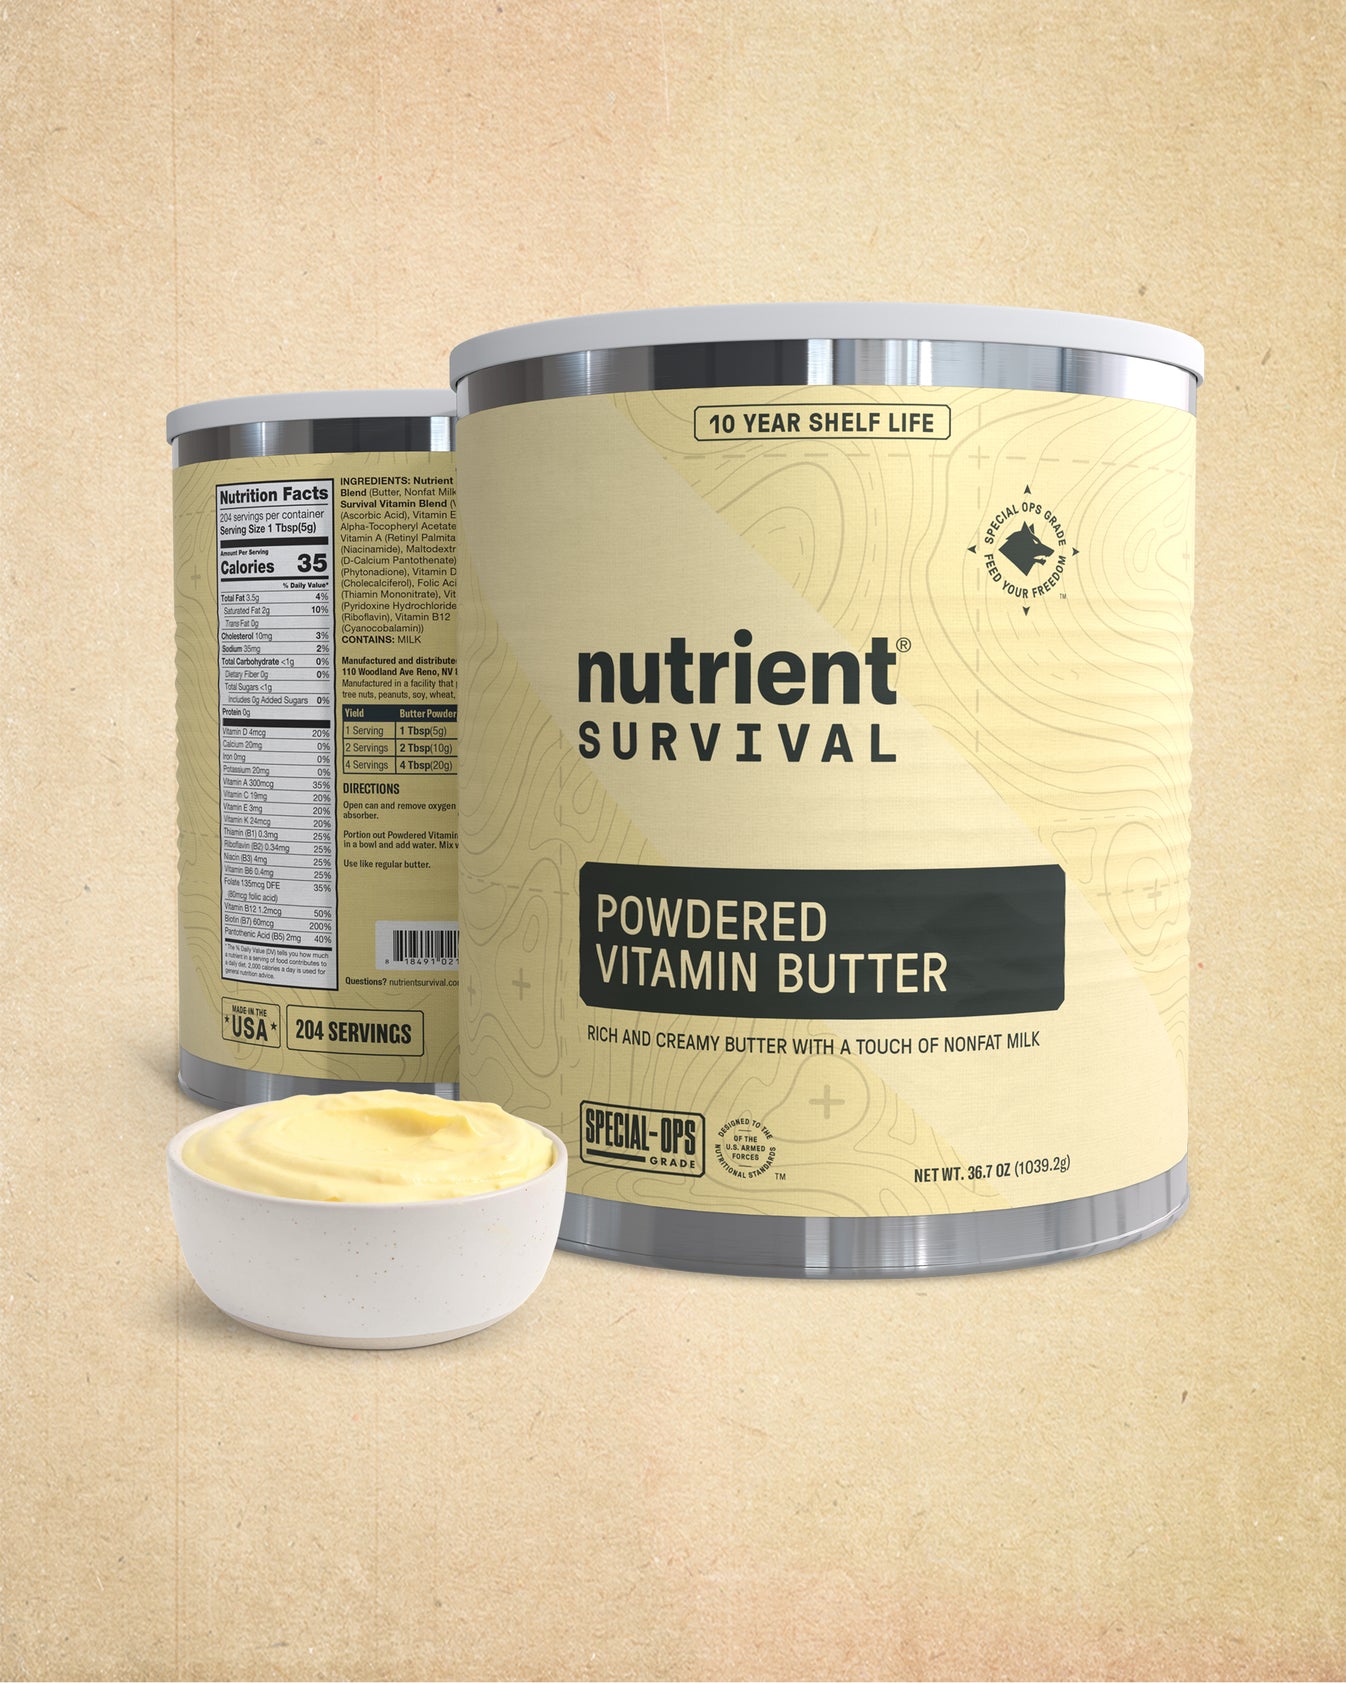 Powdered Vitamin Butter 6 Cans